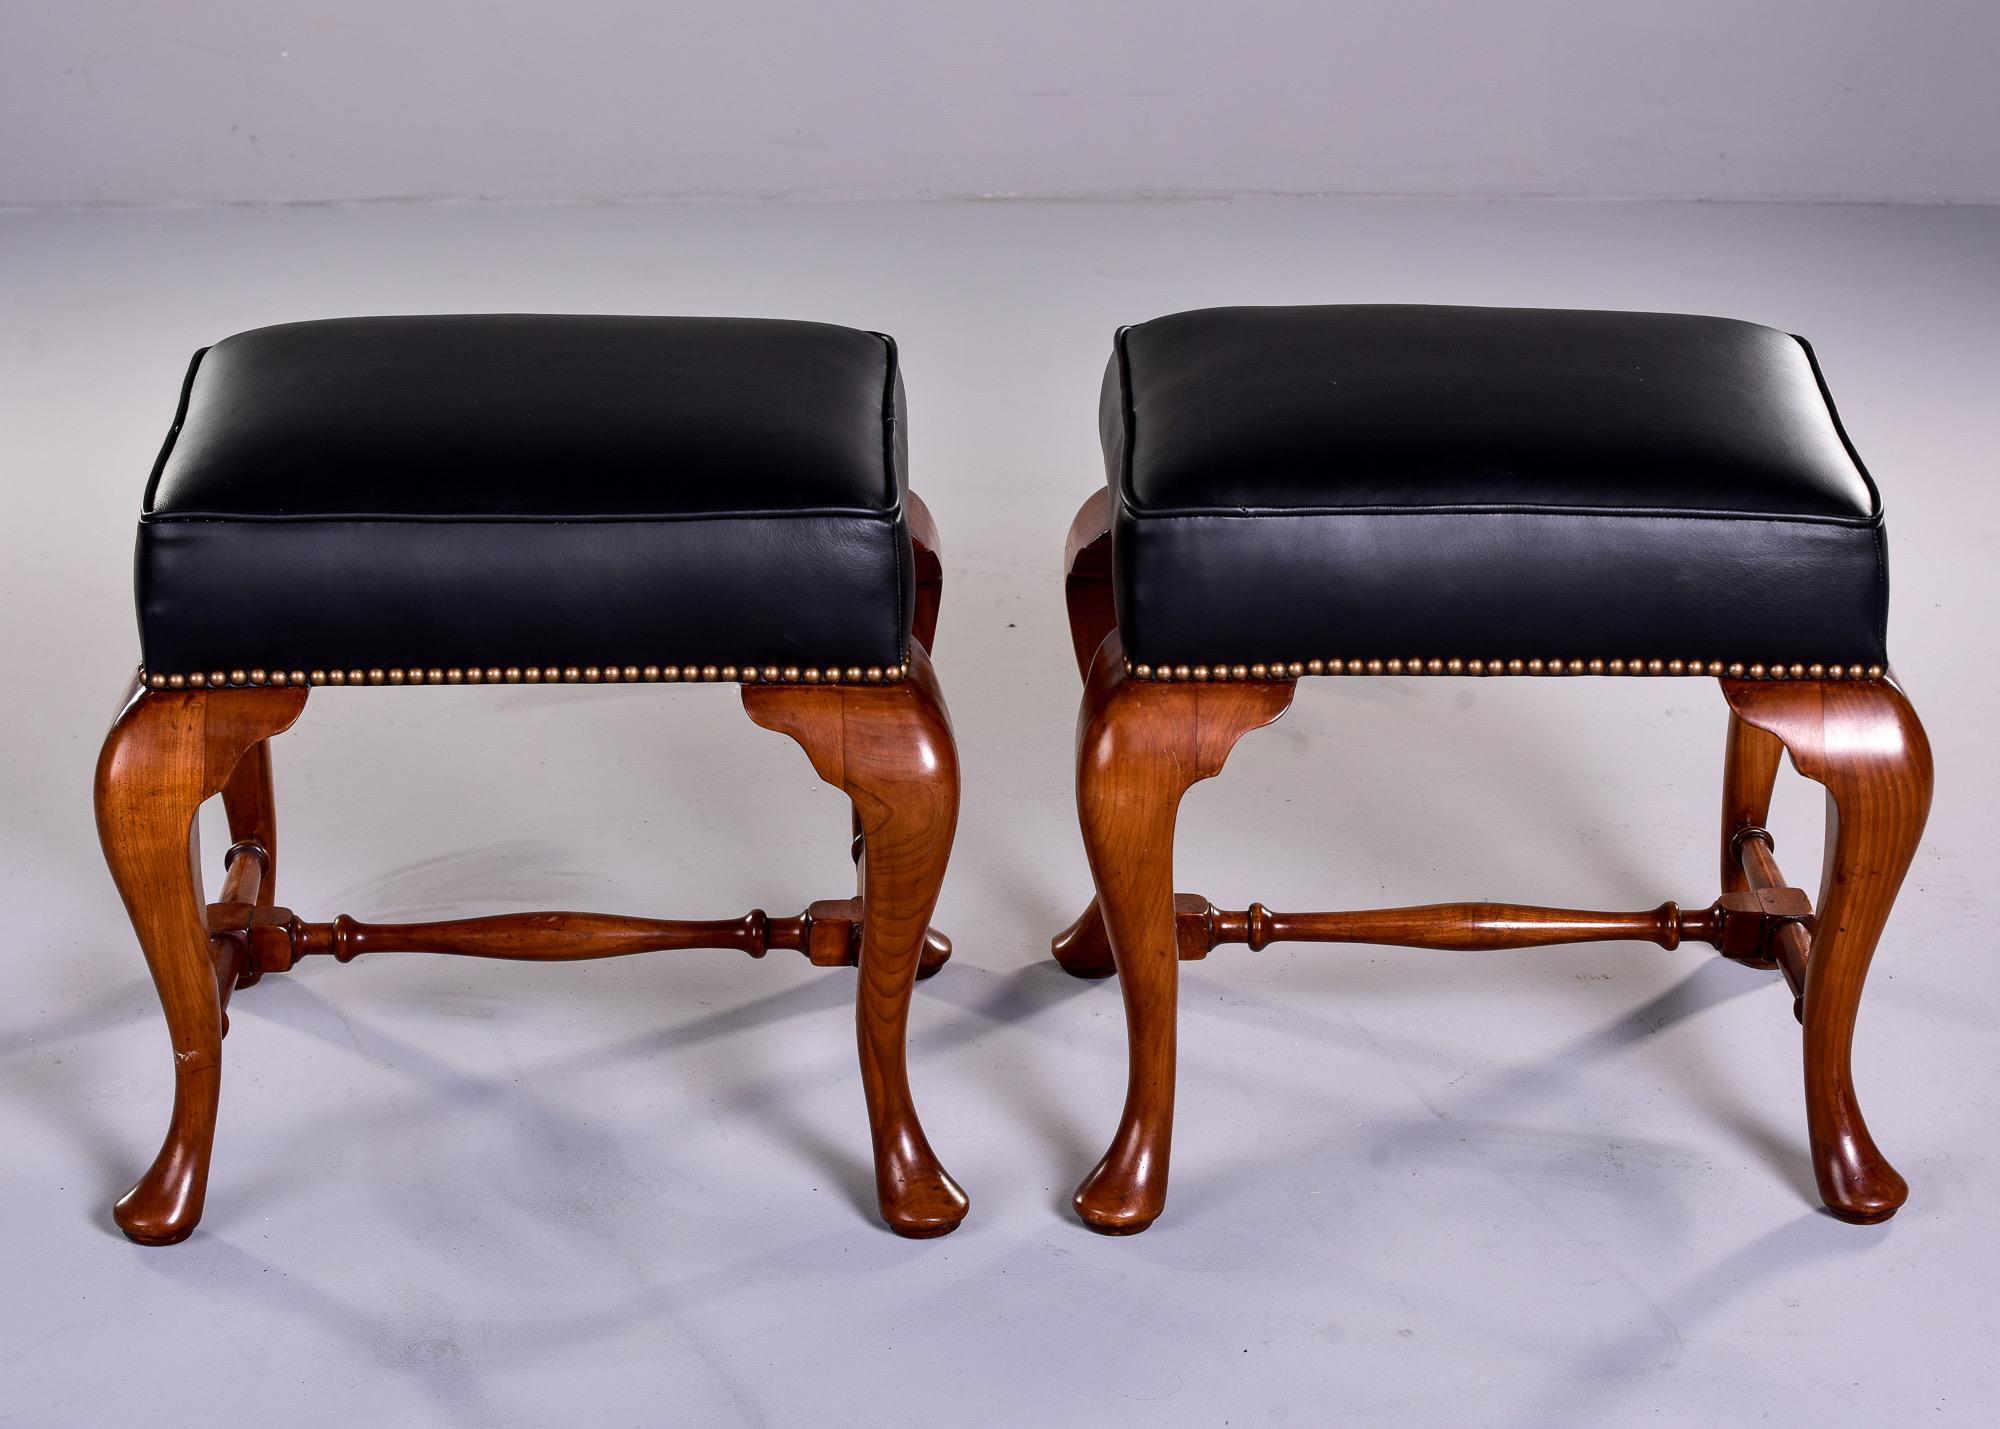 Pair English Cherry Wood and Leather Upholstered Stools In Good Condition For Sale In Troy, MI